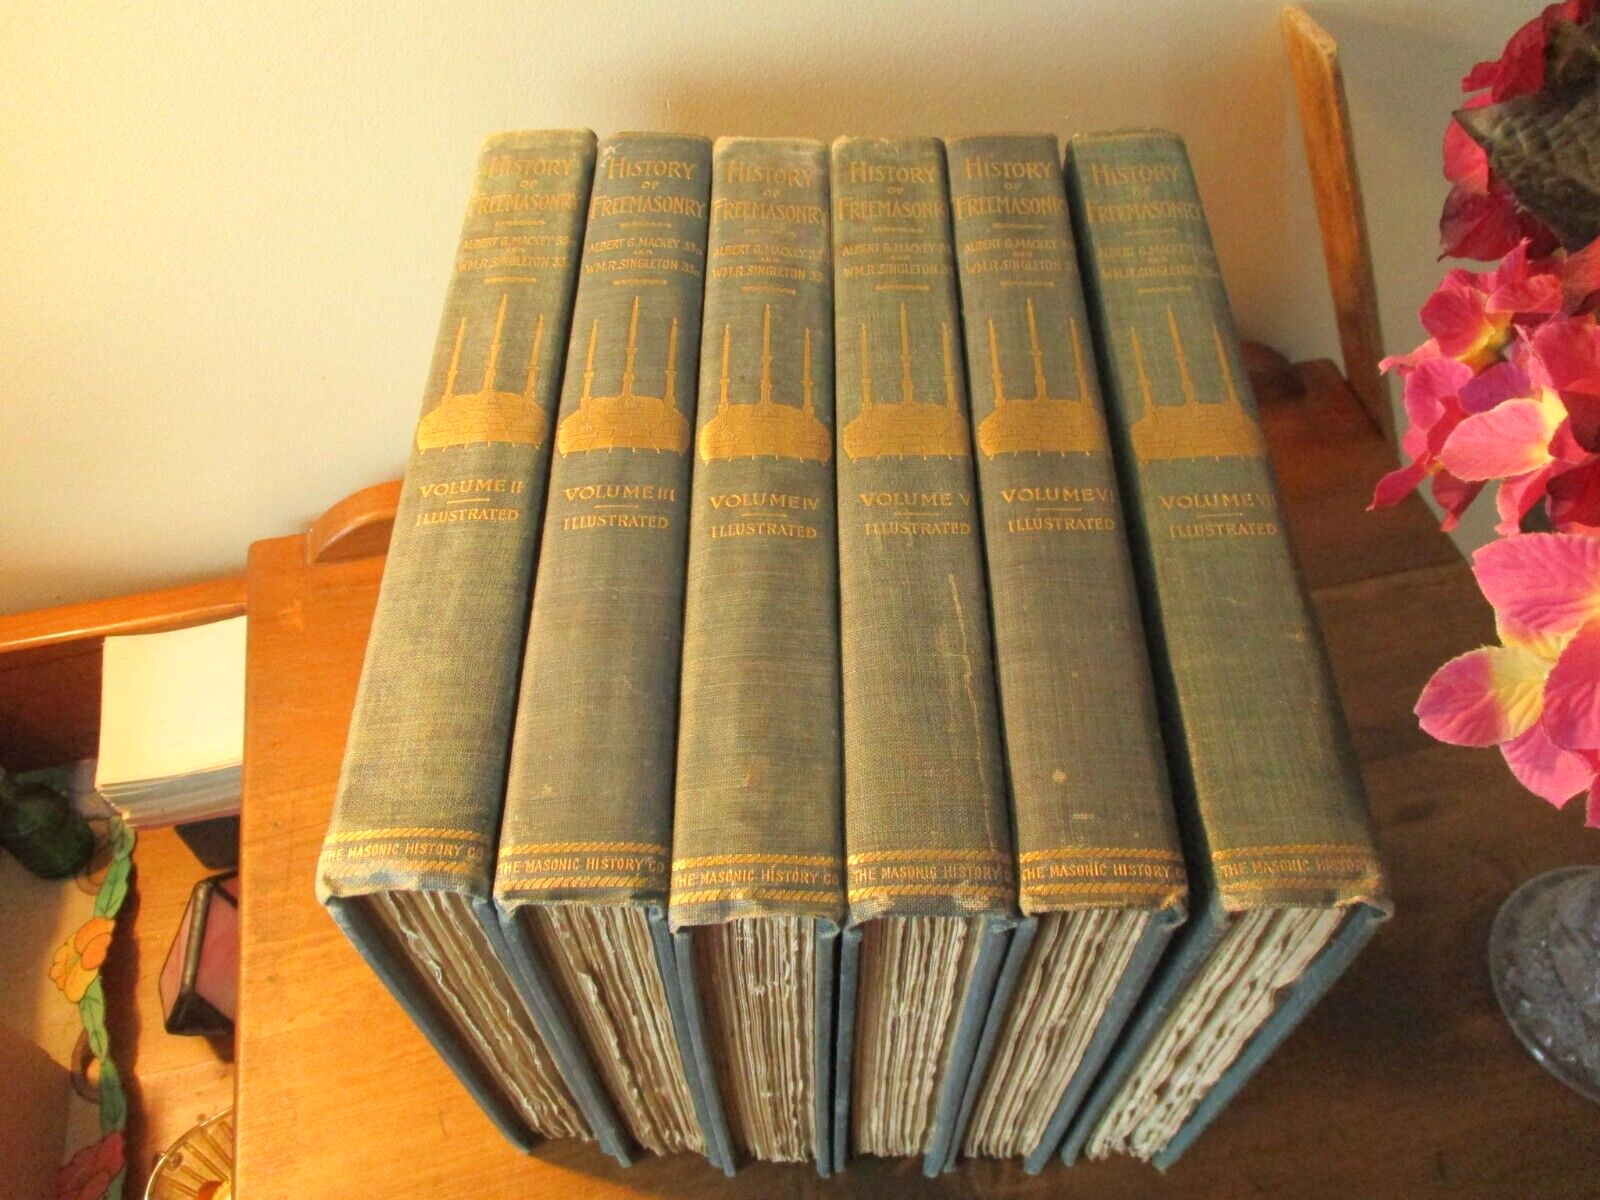 1906 VOLS 2-7 THE HISTORY OF FREEMASONRY ANCIENT & ACCEPTED SCOTTISH RITE BOOKS